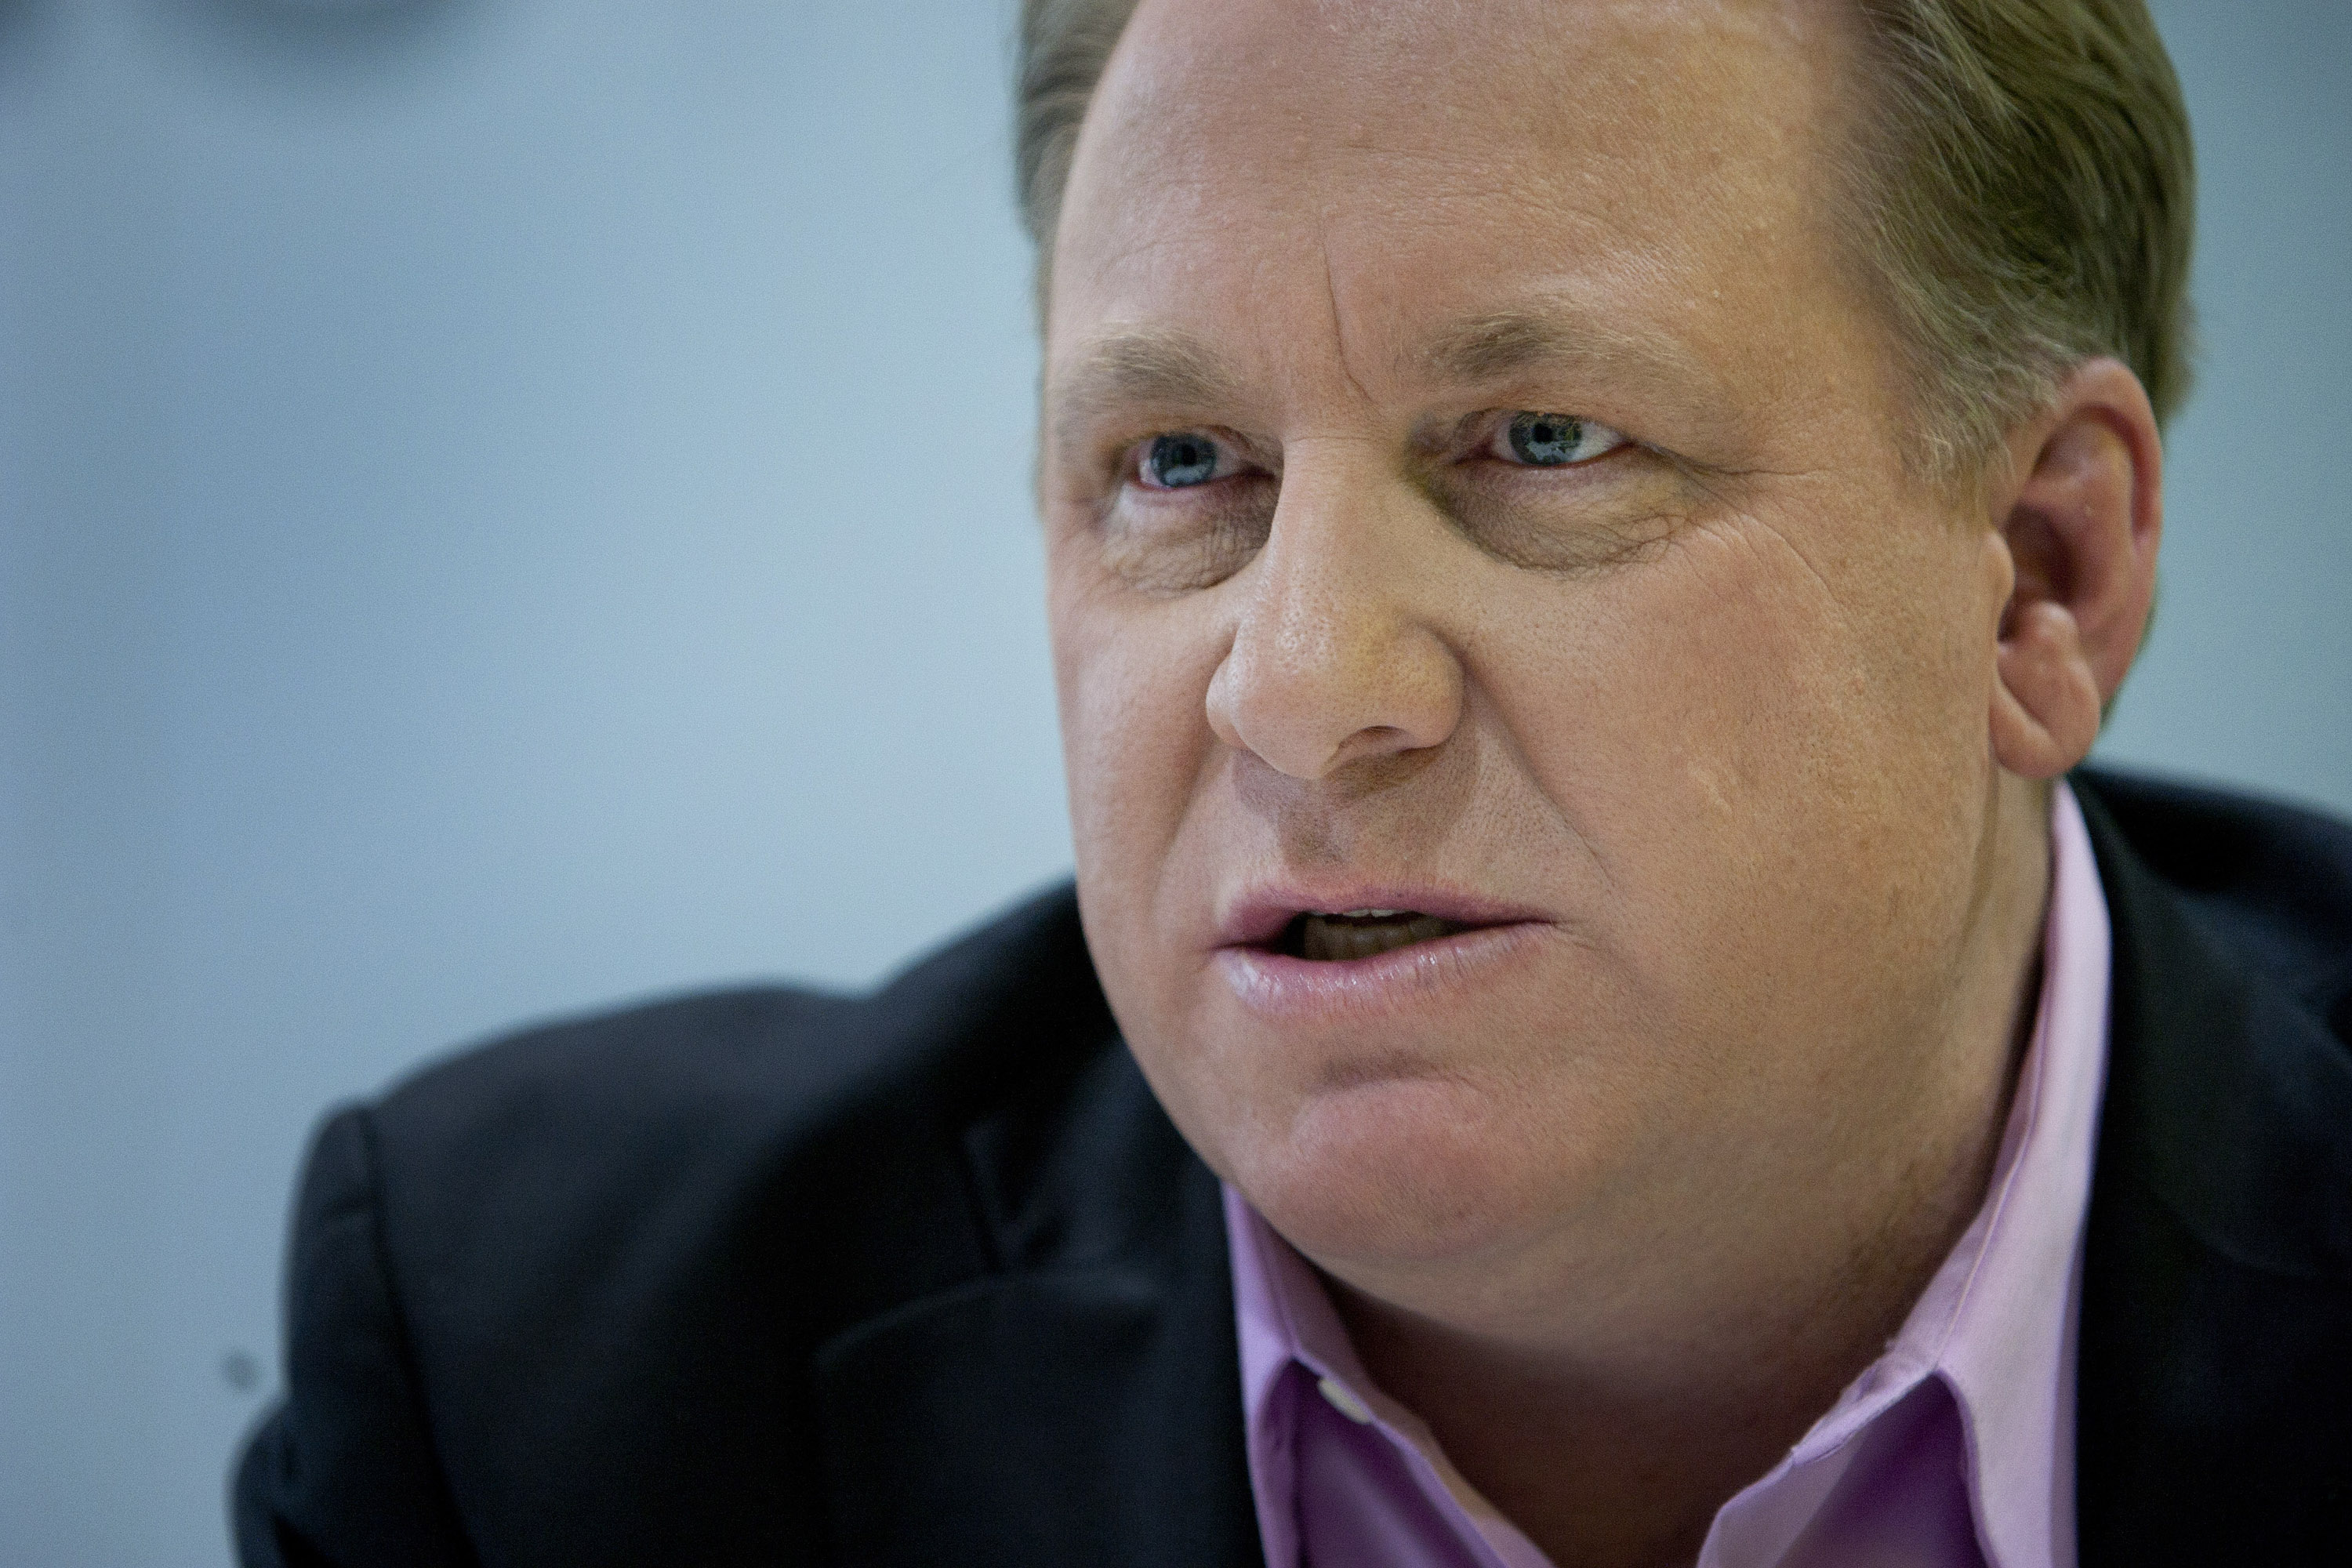 Curt Schilling, speaks during an interview in New York, U.S., on  Feb. 13, 2012.